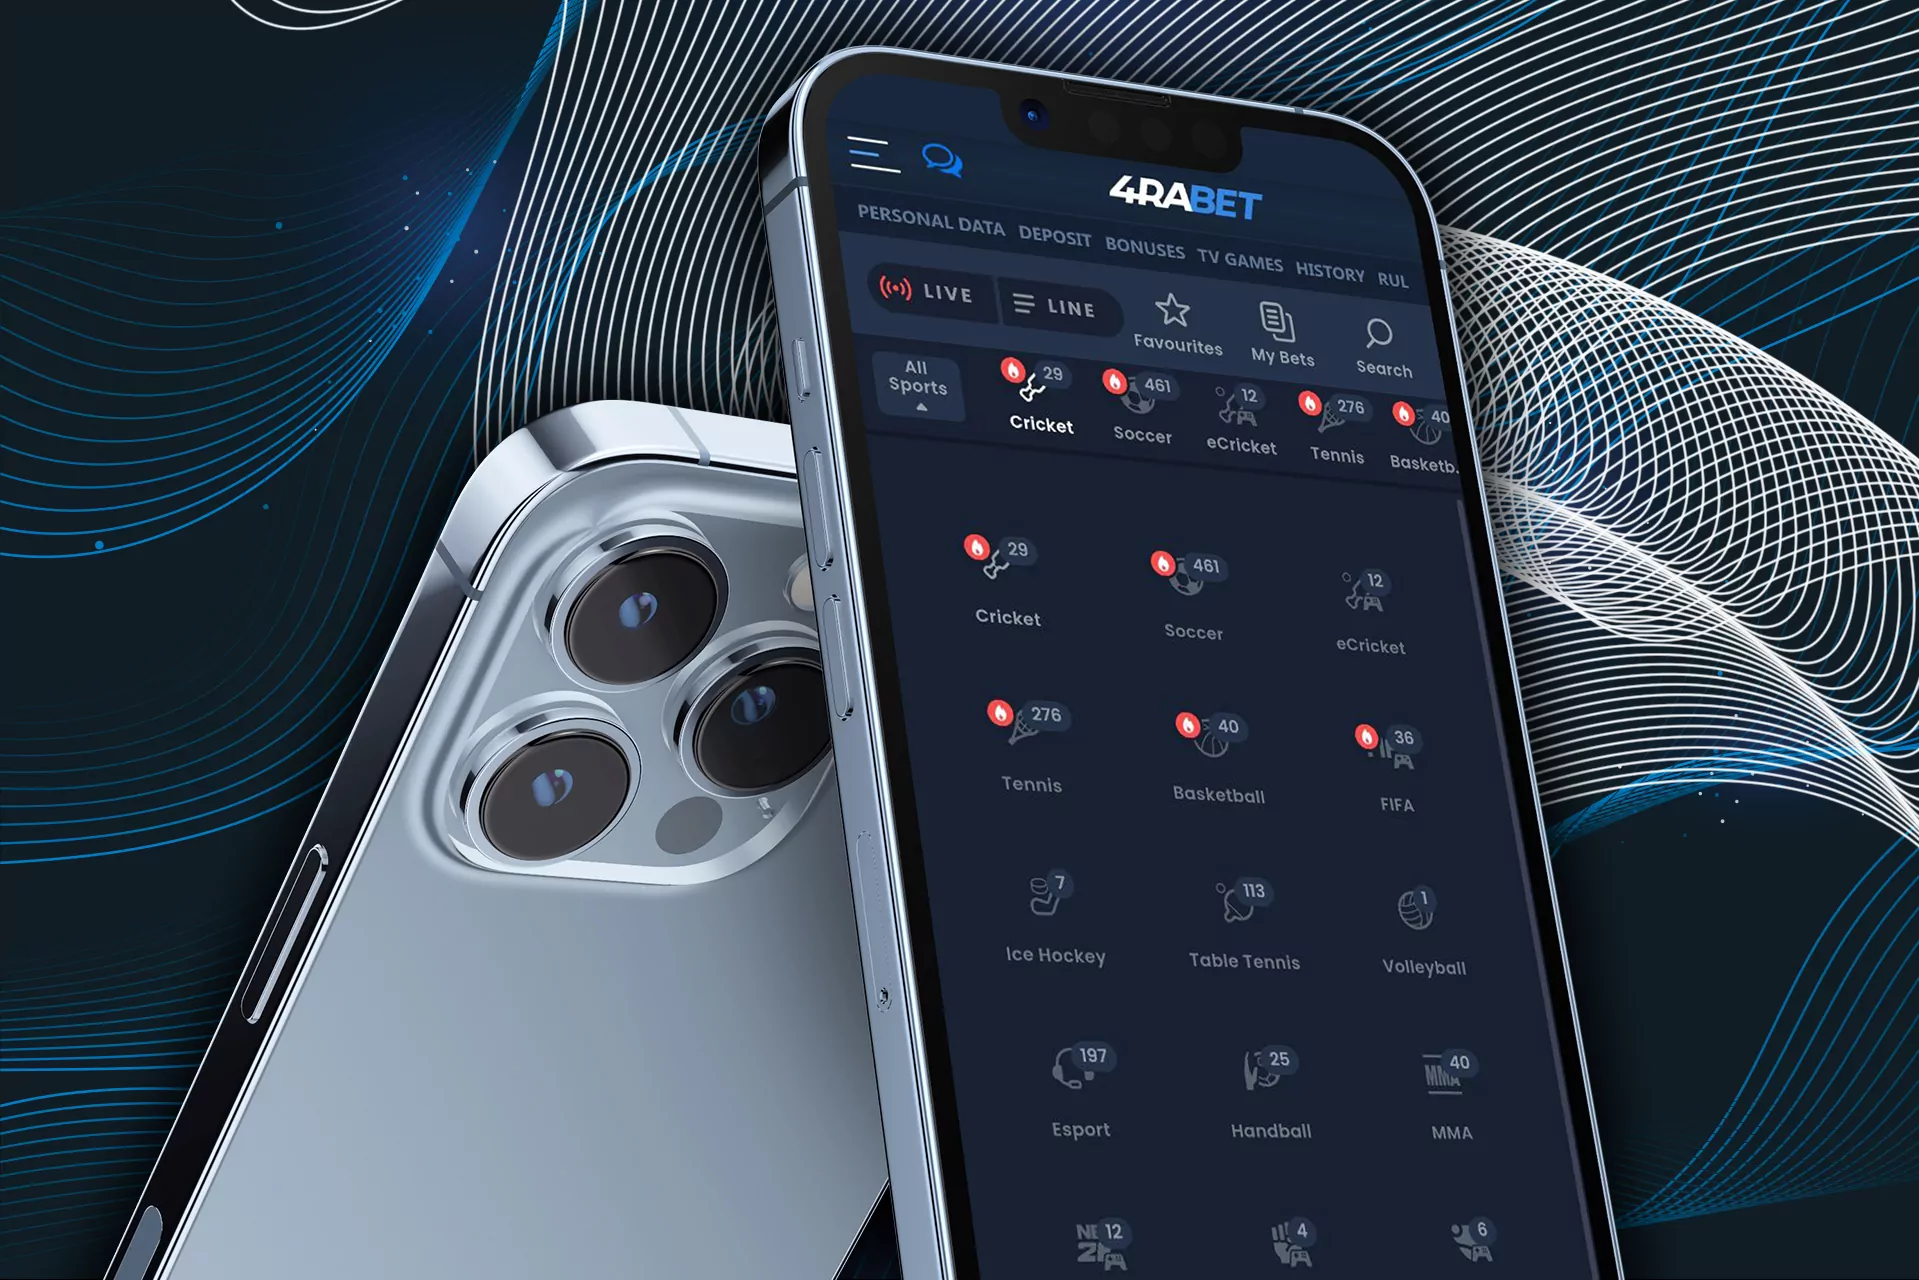 All betting options are available in 4Rabet app for such categories as: sports betting, esports, virtual sports, above mentioned types of bets are available for traditional sports, esports, virtual and other types.